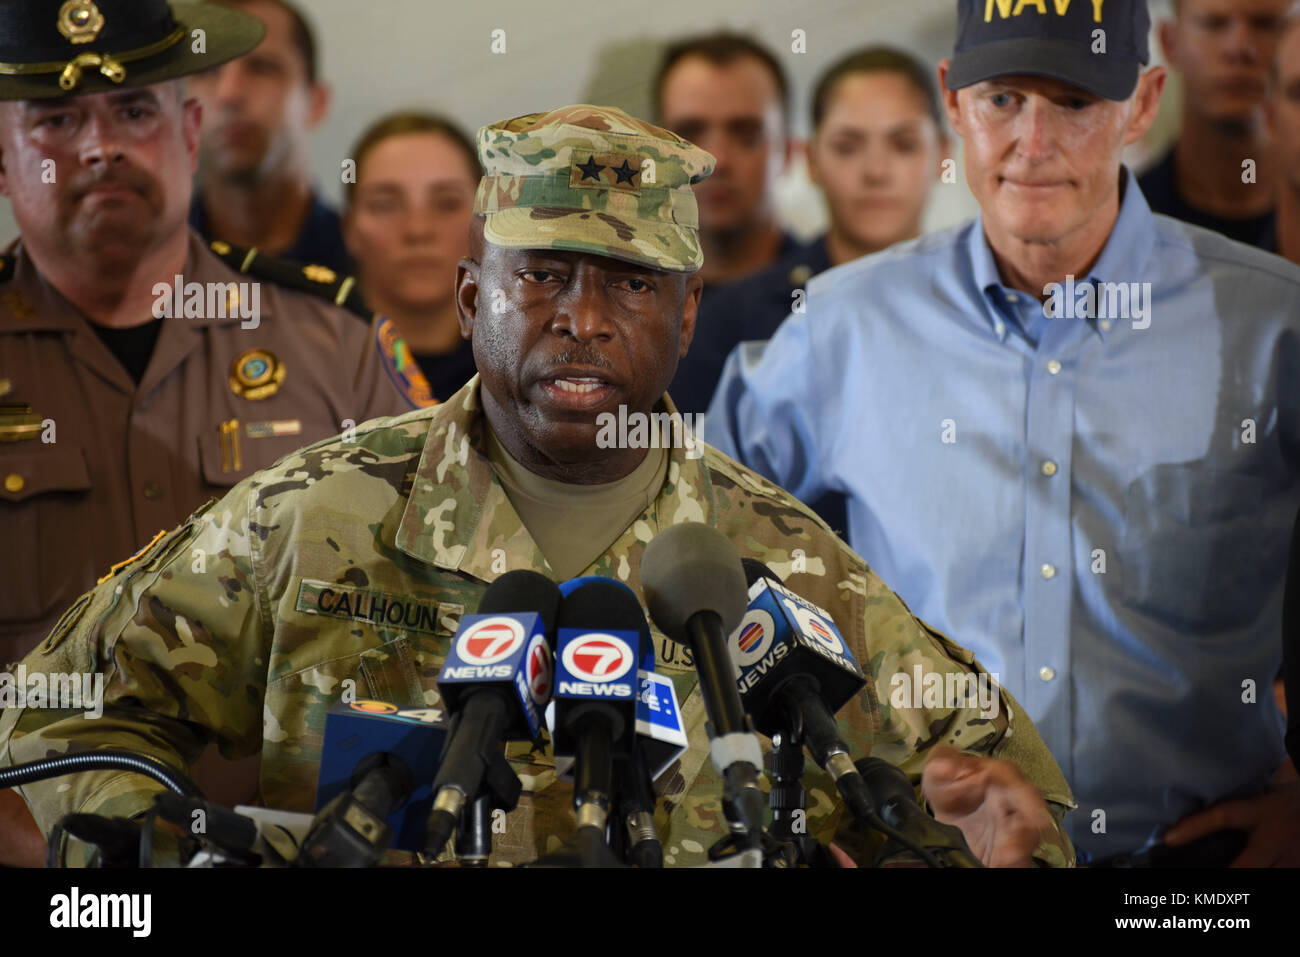 U.S. Army National Guard Florida Adjutant General Michael Calhoun speaks about the aftermath of Hurricane Irma during a press conference at the Coast Guard Air Station Miami September 11, 2017 in Opa Locka, Florida. (photo by PO1 Mark Barney  via Planetpix) Stock Photo